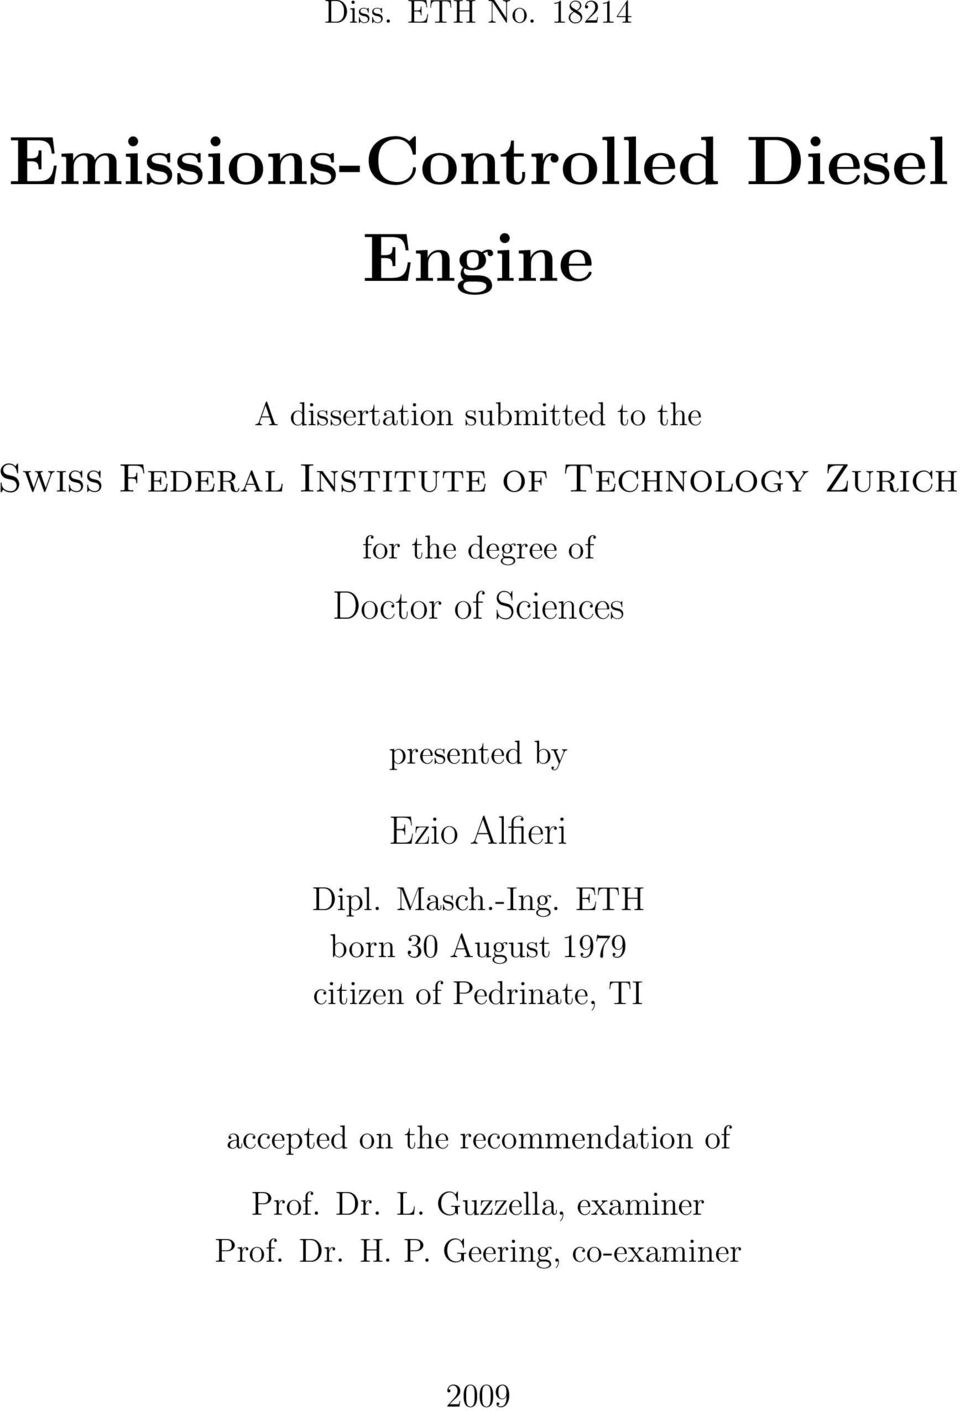 Institute of Technology Zurich for the degree of Doctor of Sciences presented by Ezio